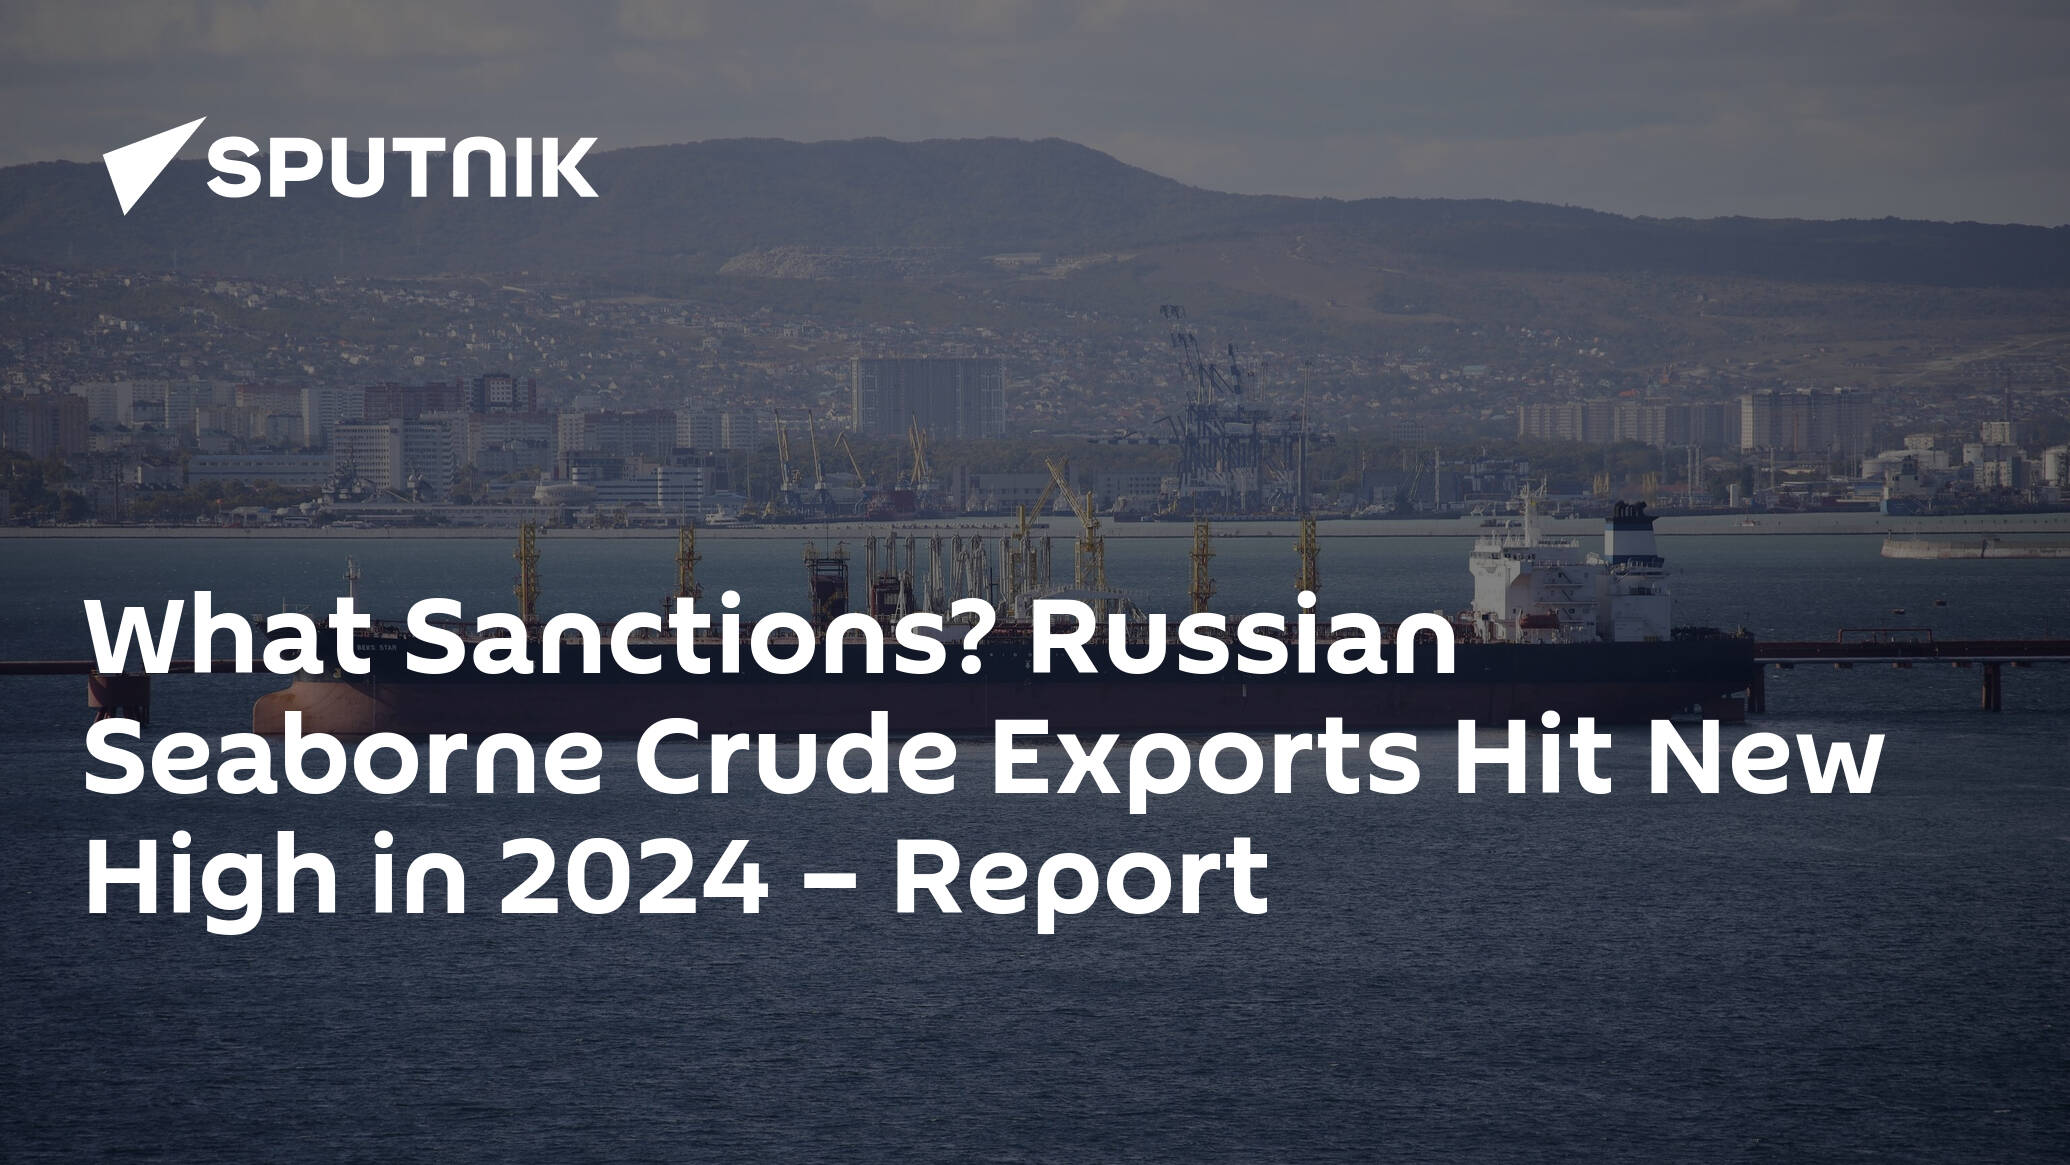 What Sanctions Russian Seaborne Crude Exports Hit New High in